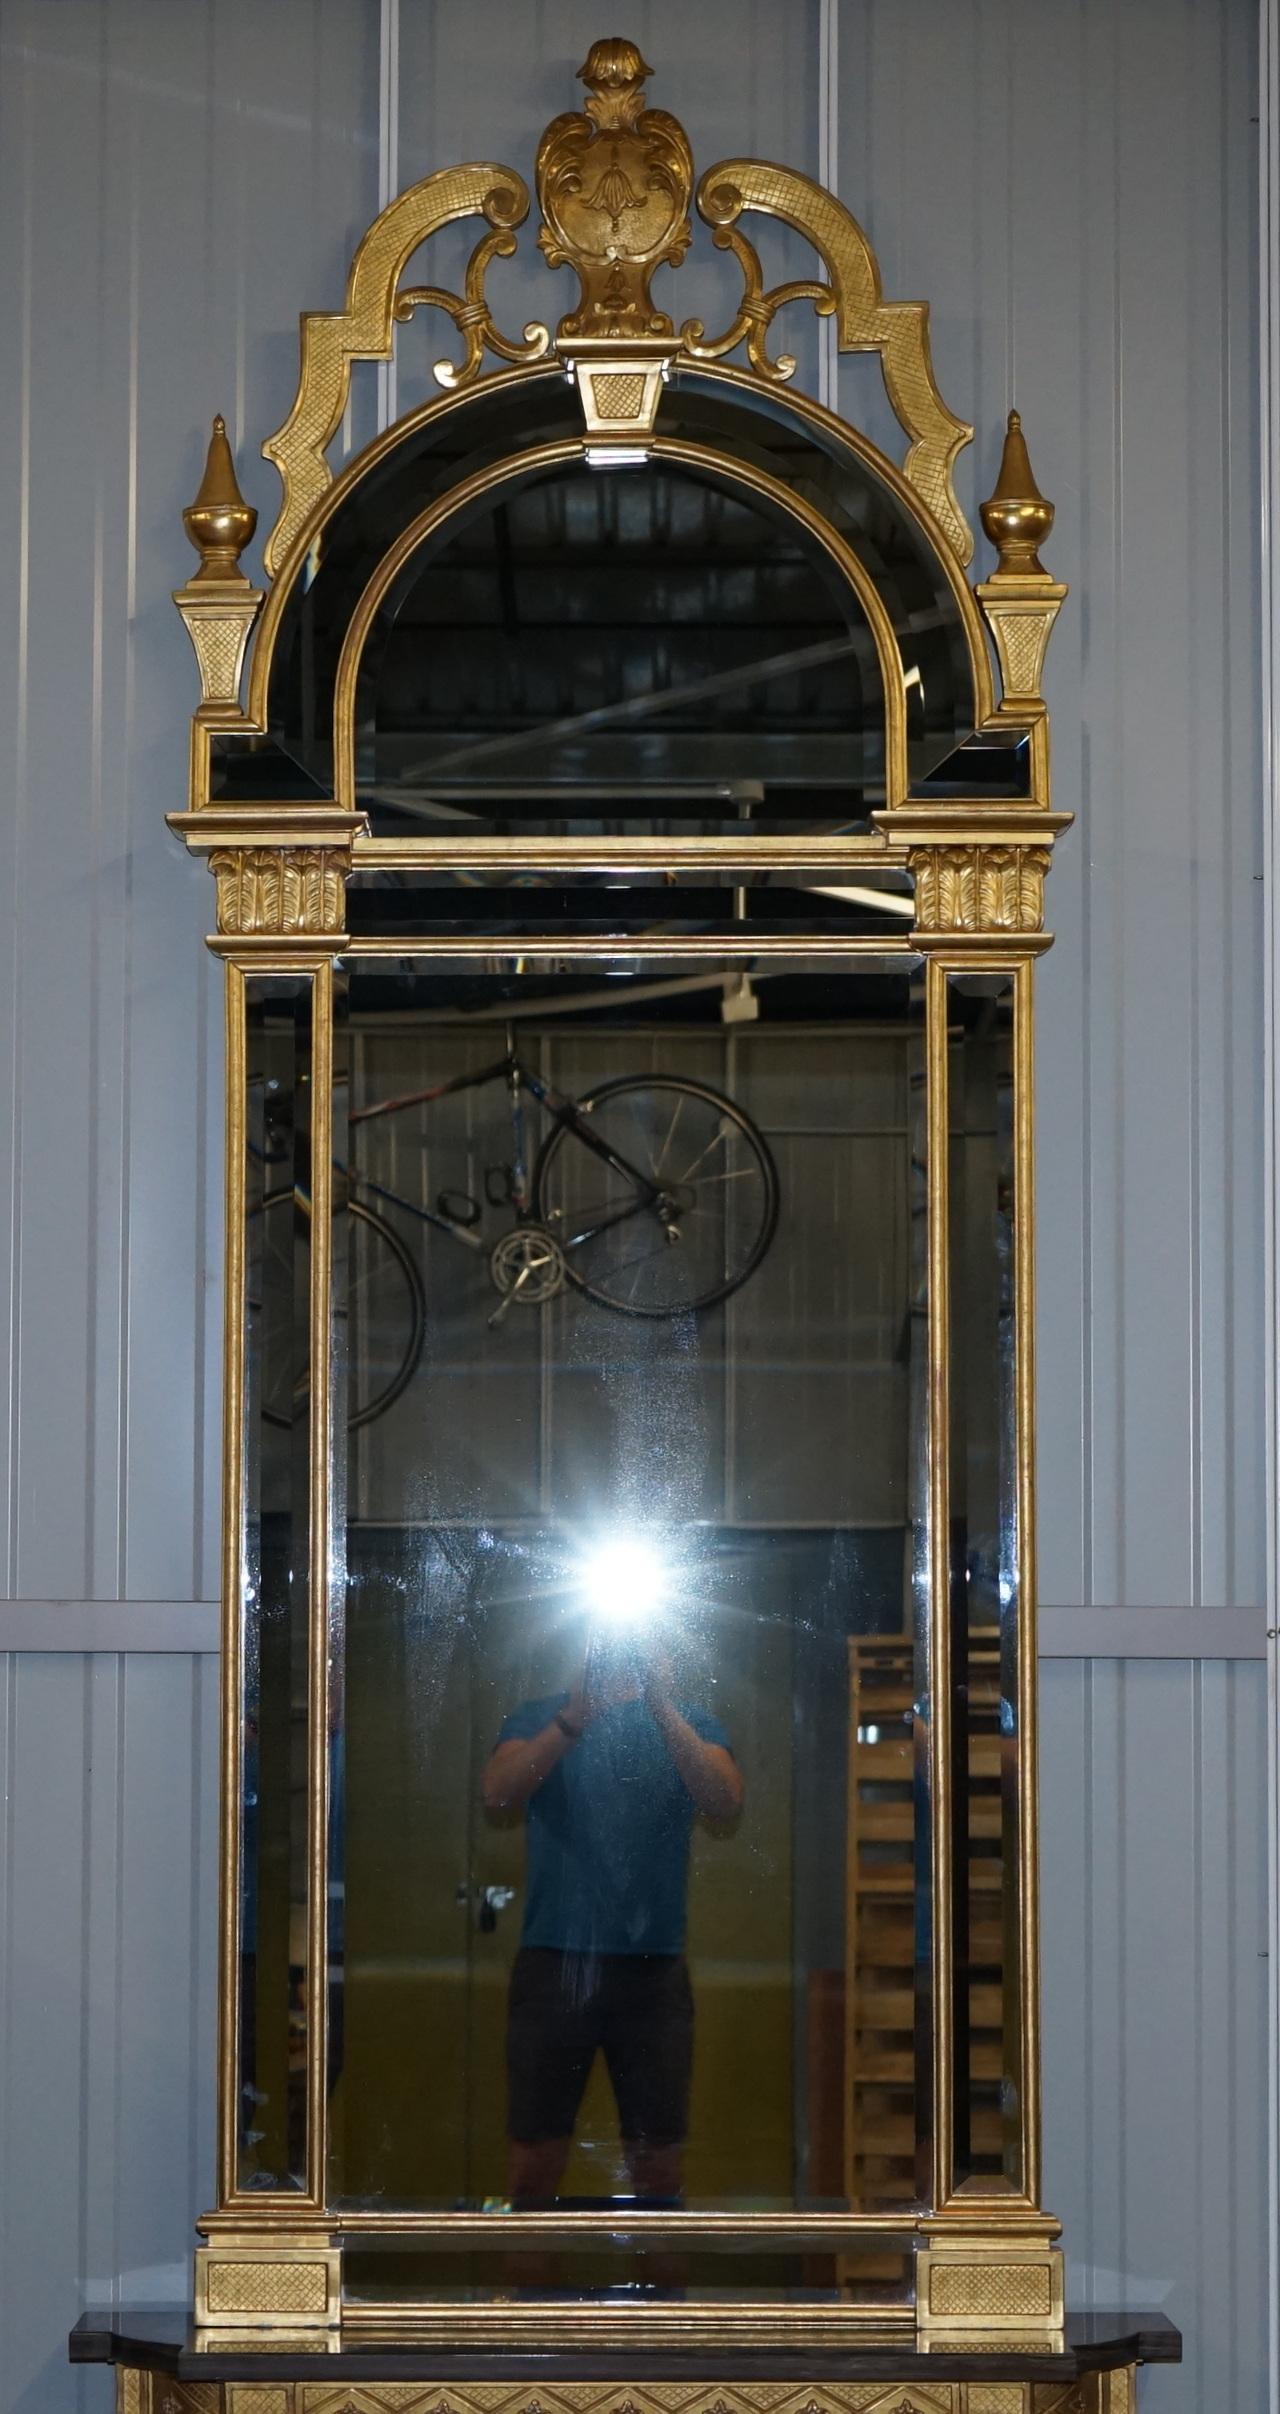 We are delighted to offer this absolutely enormous Giltwood pier mirror and marble topped console table after Robert Adam, 1728-1782

A very good looking and highly decorative Pier mirror with matching console table, the pair together genuinely